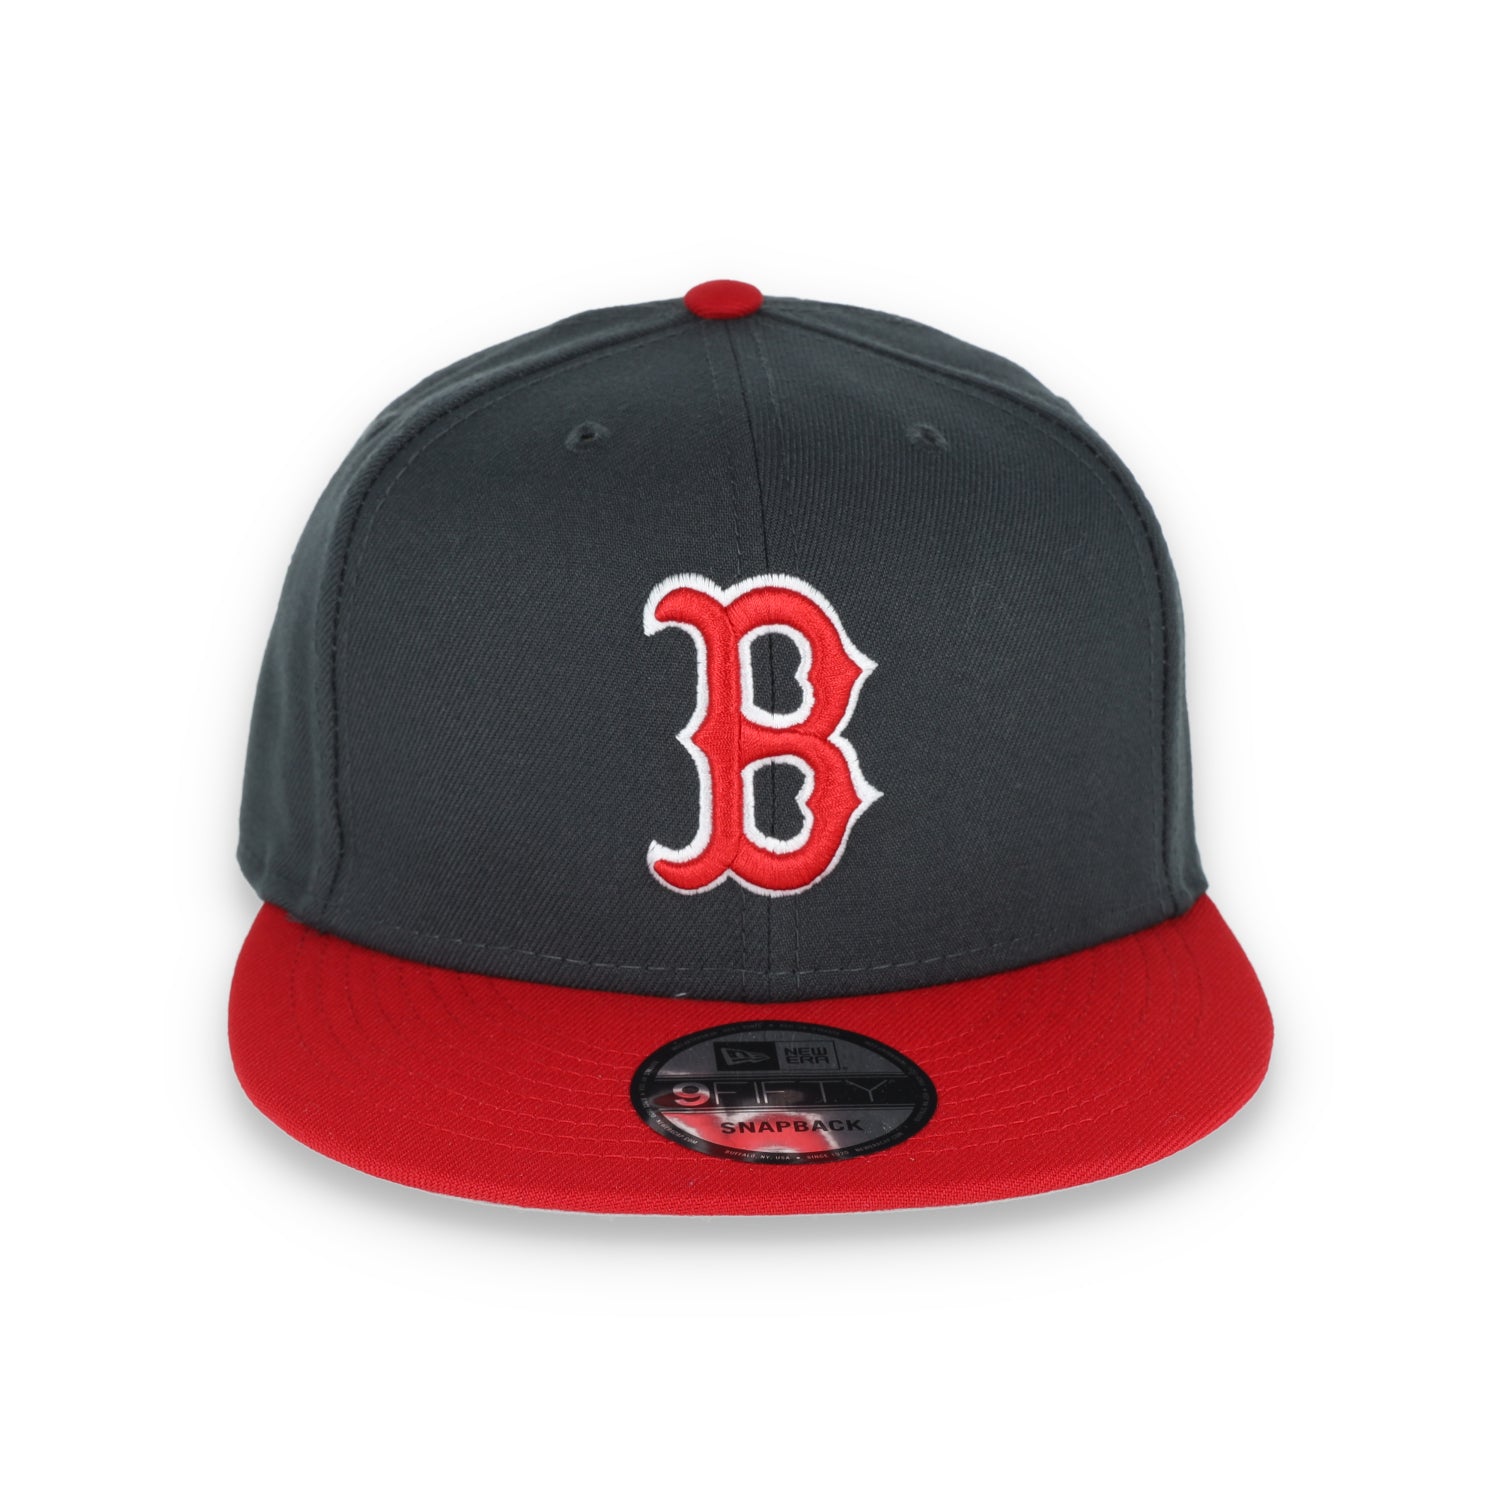 New Era Boston Red Sox 2-Tone Color Pack 9FIFTY Snapback Hat -Grey/Scarlet